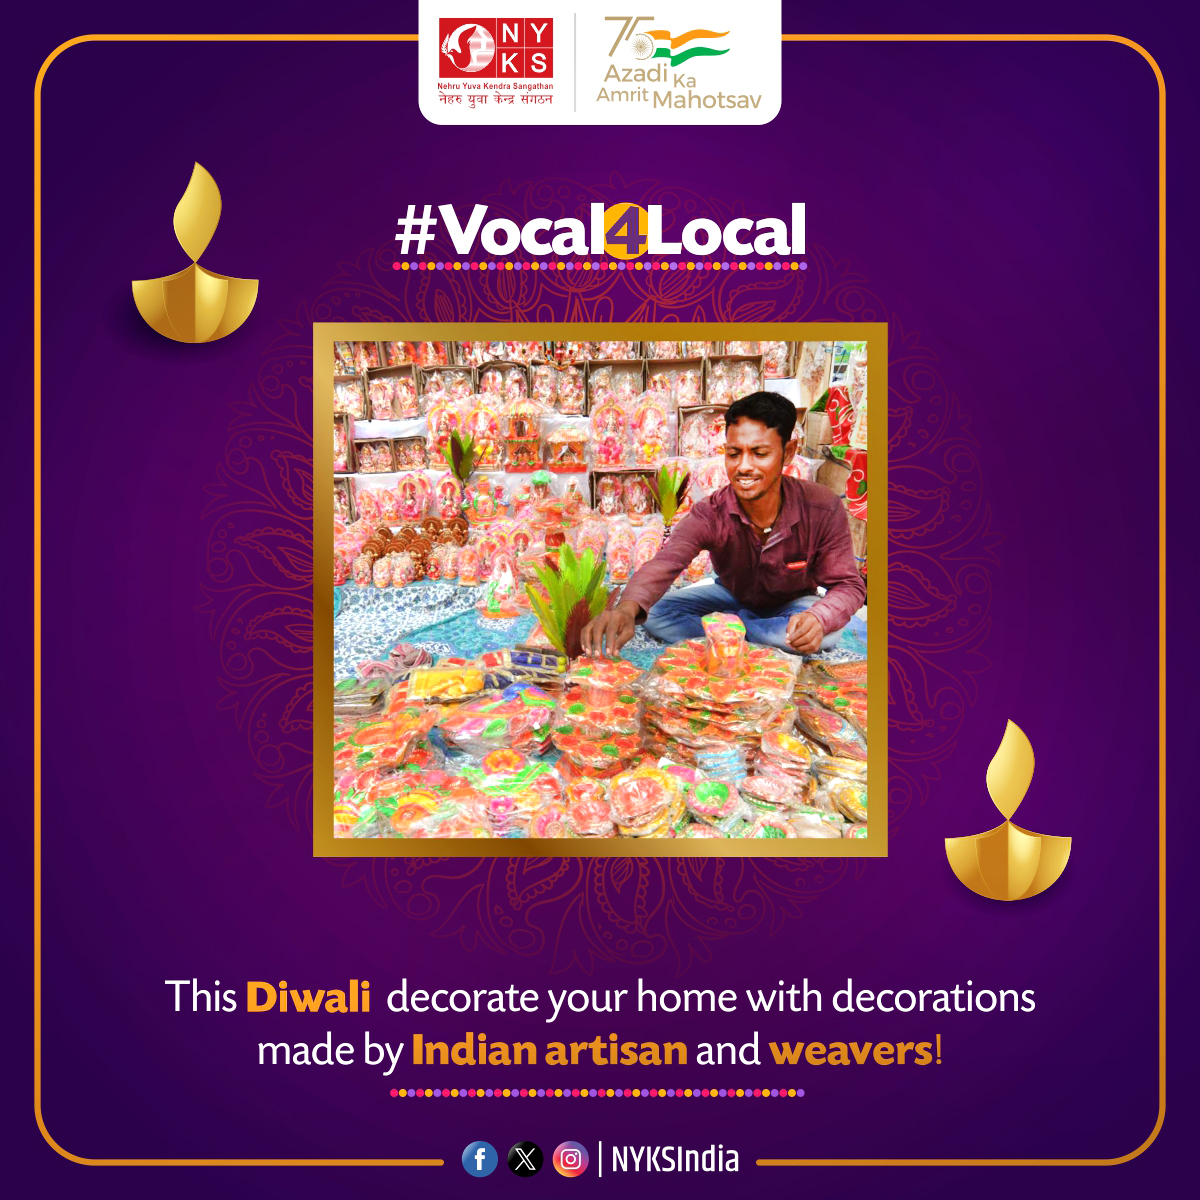 Embrace the spirit of Diwali by adorning your home with exquisite decorations crafted by skilled Indian artisans and weavers. 🪔✨ 

#Vocal4Local #DiwaliDecor #SupportLocalArtisans  #NYKS